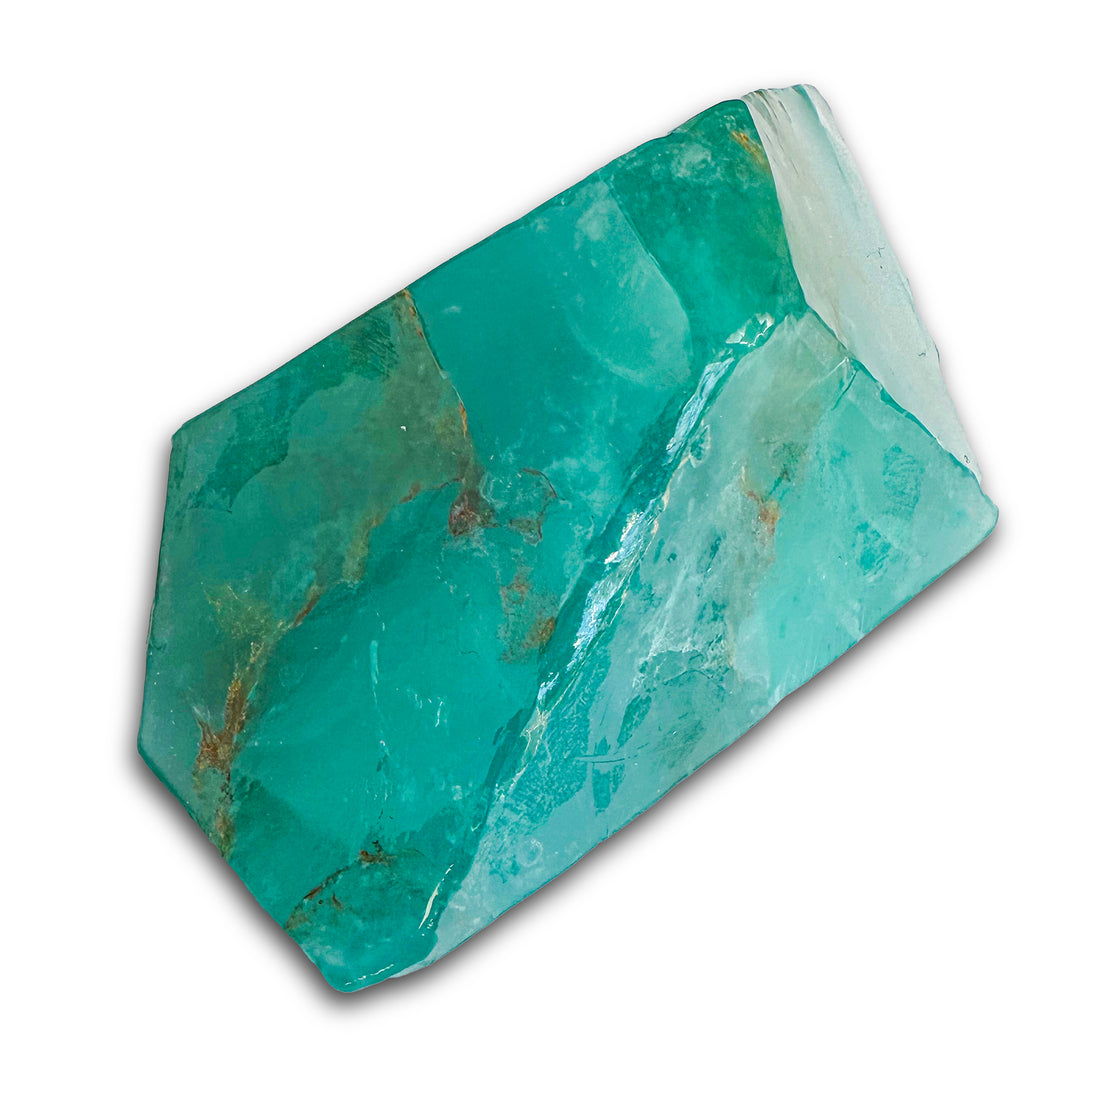 Blue Agate SoapRock® - turquoise blue teal soap with flecks of gold and a hint of marbling make this bar of soap look like a real gemstone!